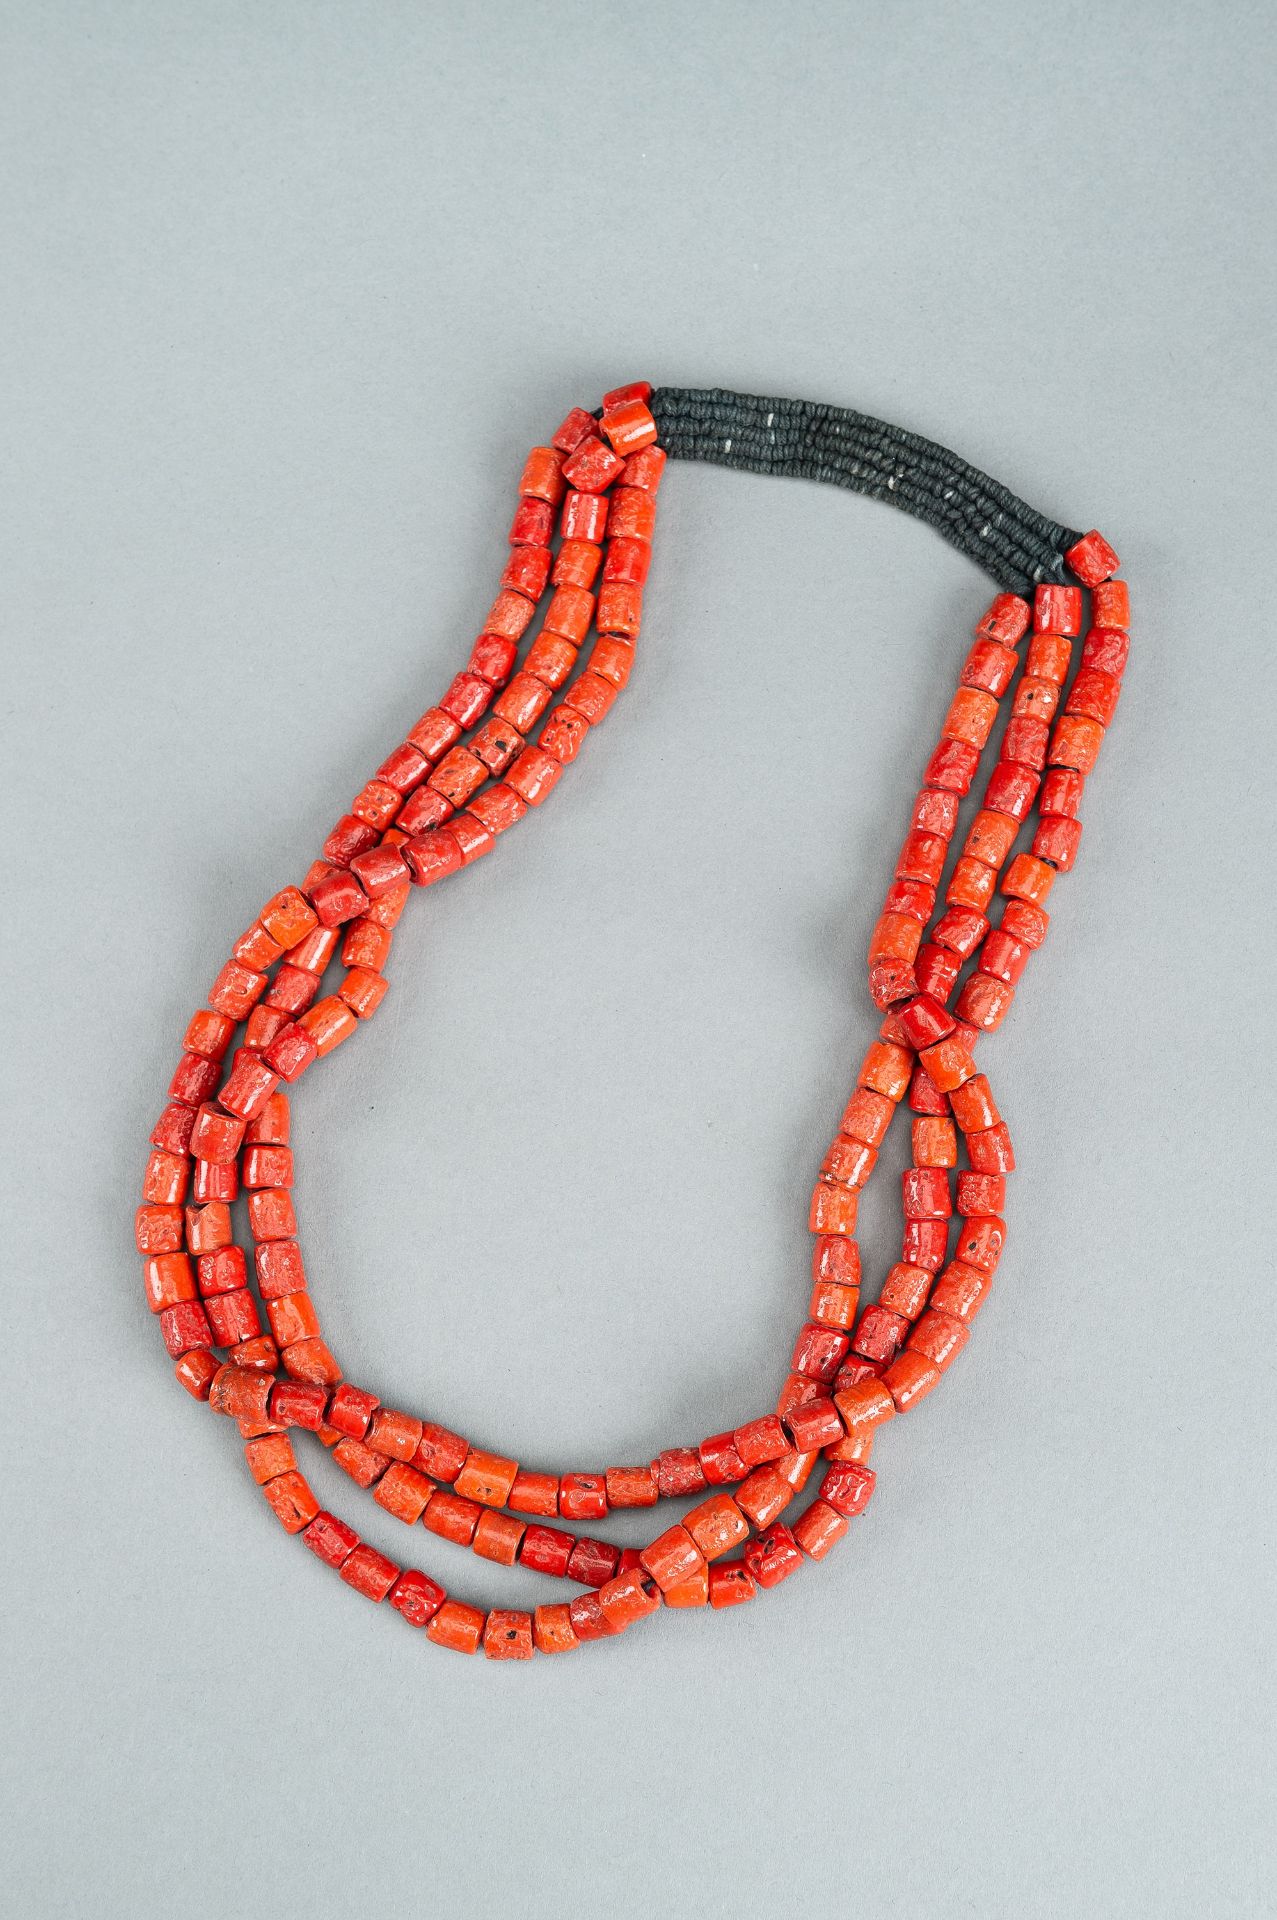 A NAGALAND 'CORAL' GLASS NECKLACE, c. 1900s - Image 7 of 9